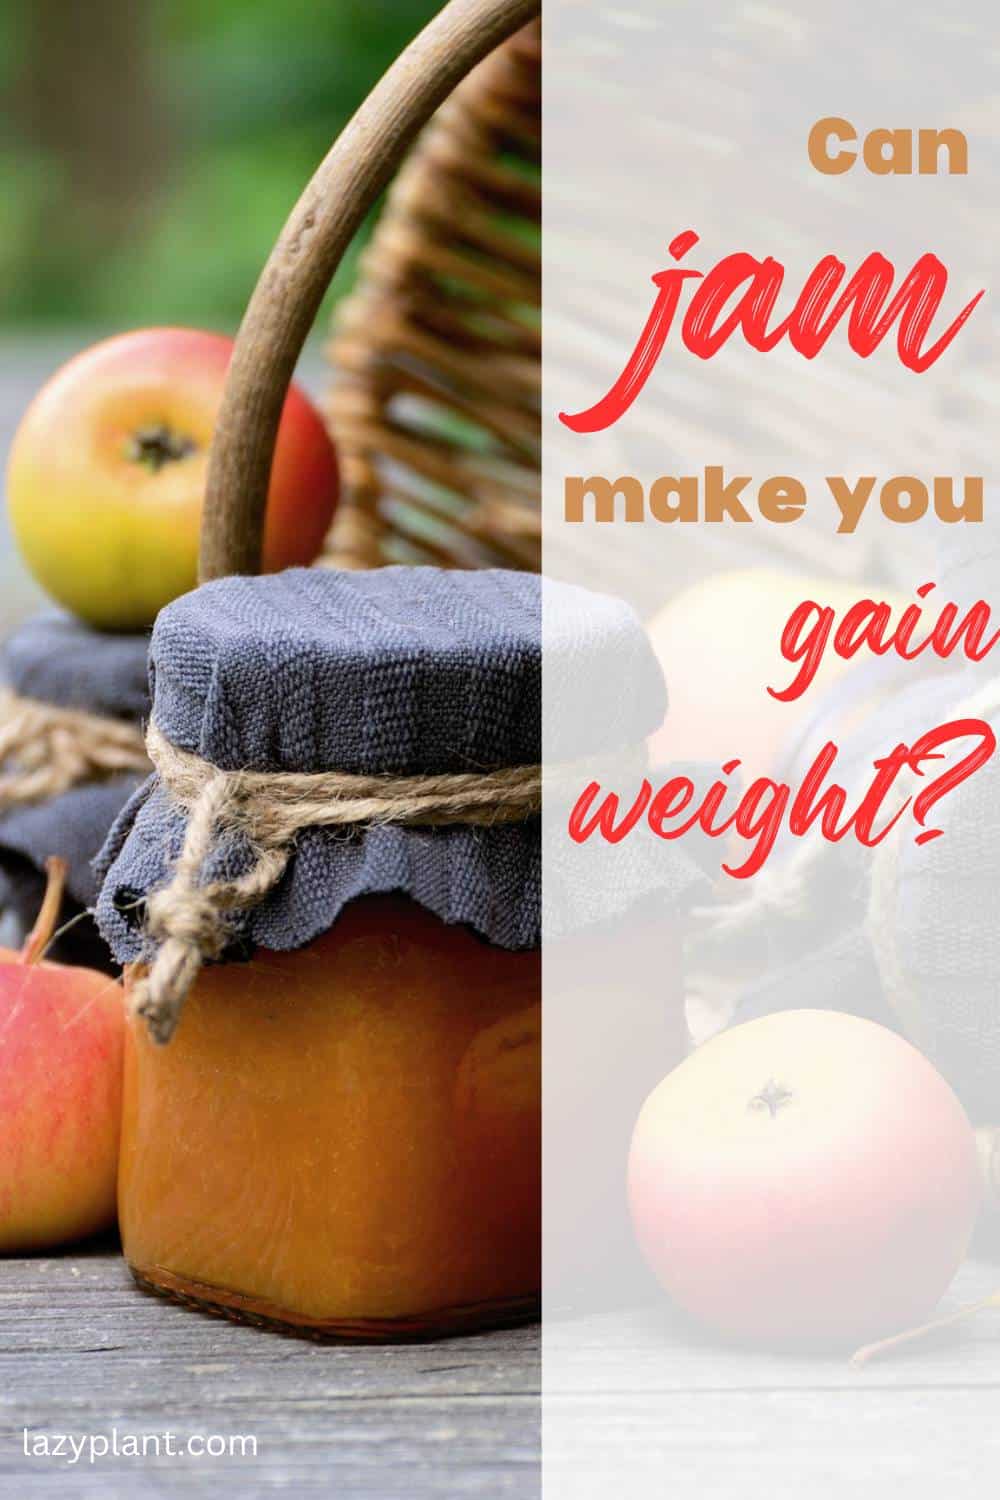 Can jam, jelly, or marmalade make you gain weight?